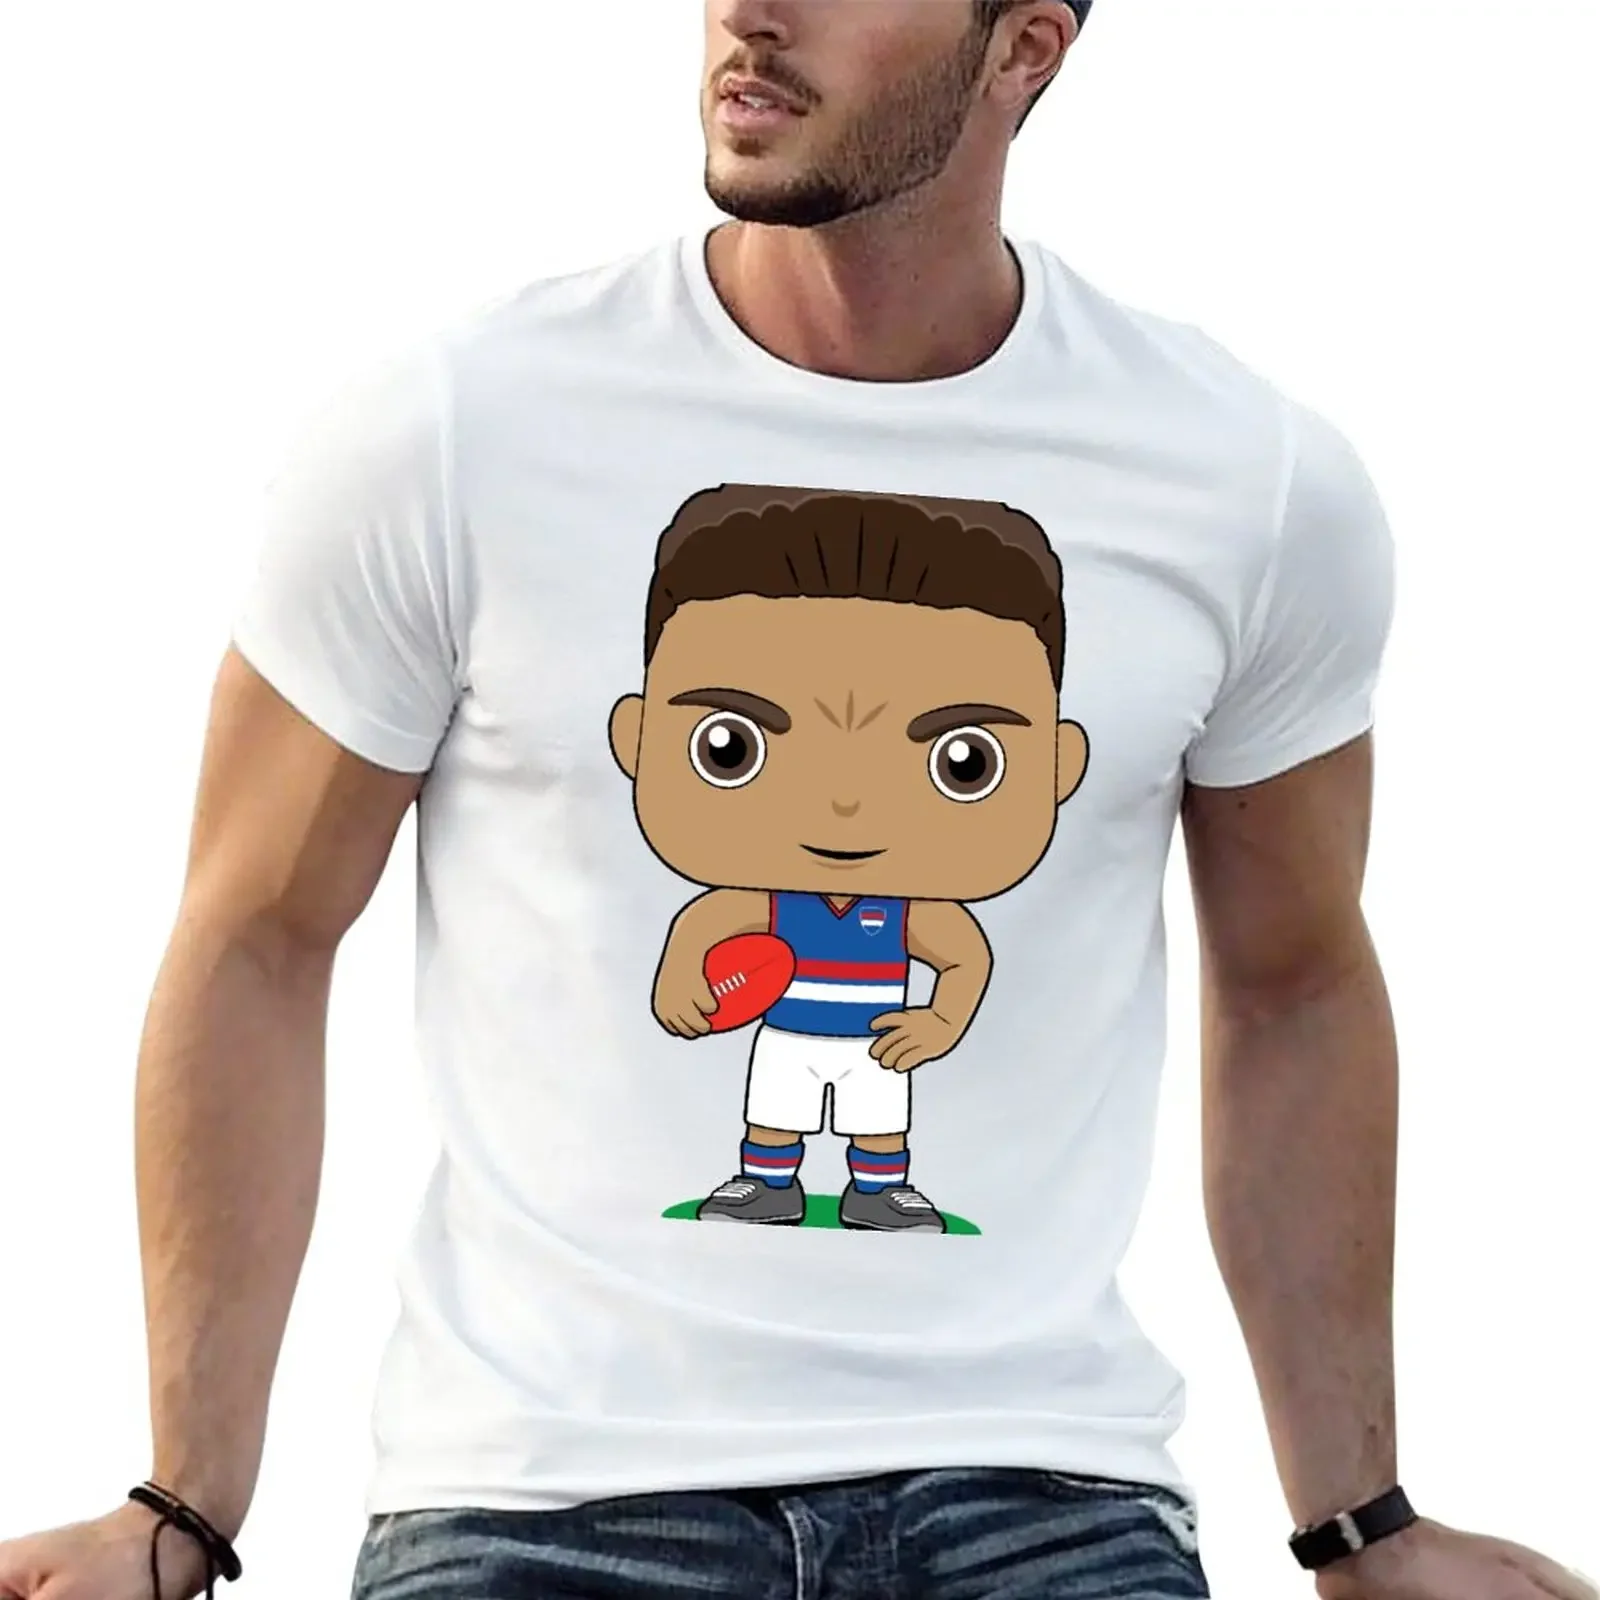 

Cute Western Bulldogs Footy Player Mascot T-Shirt animal prinfor boys sublime anime t shirts for men pack